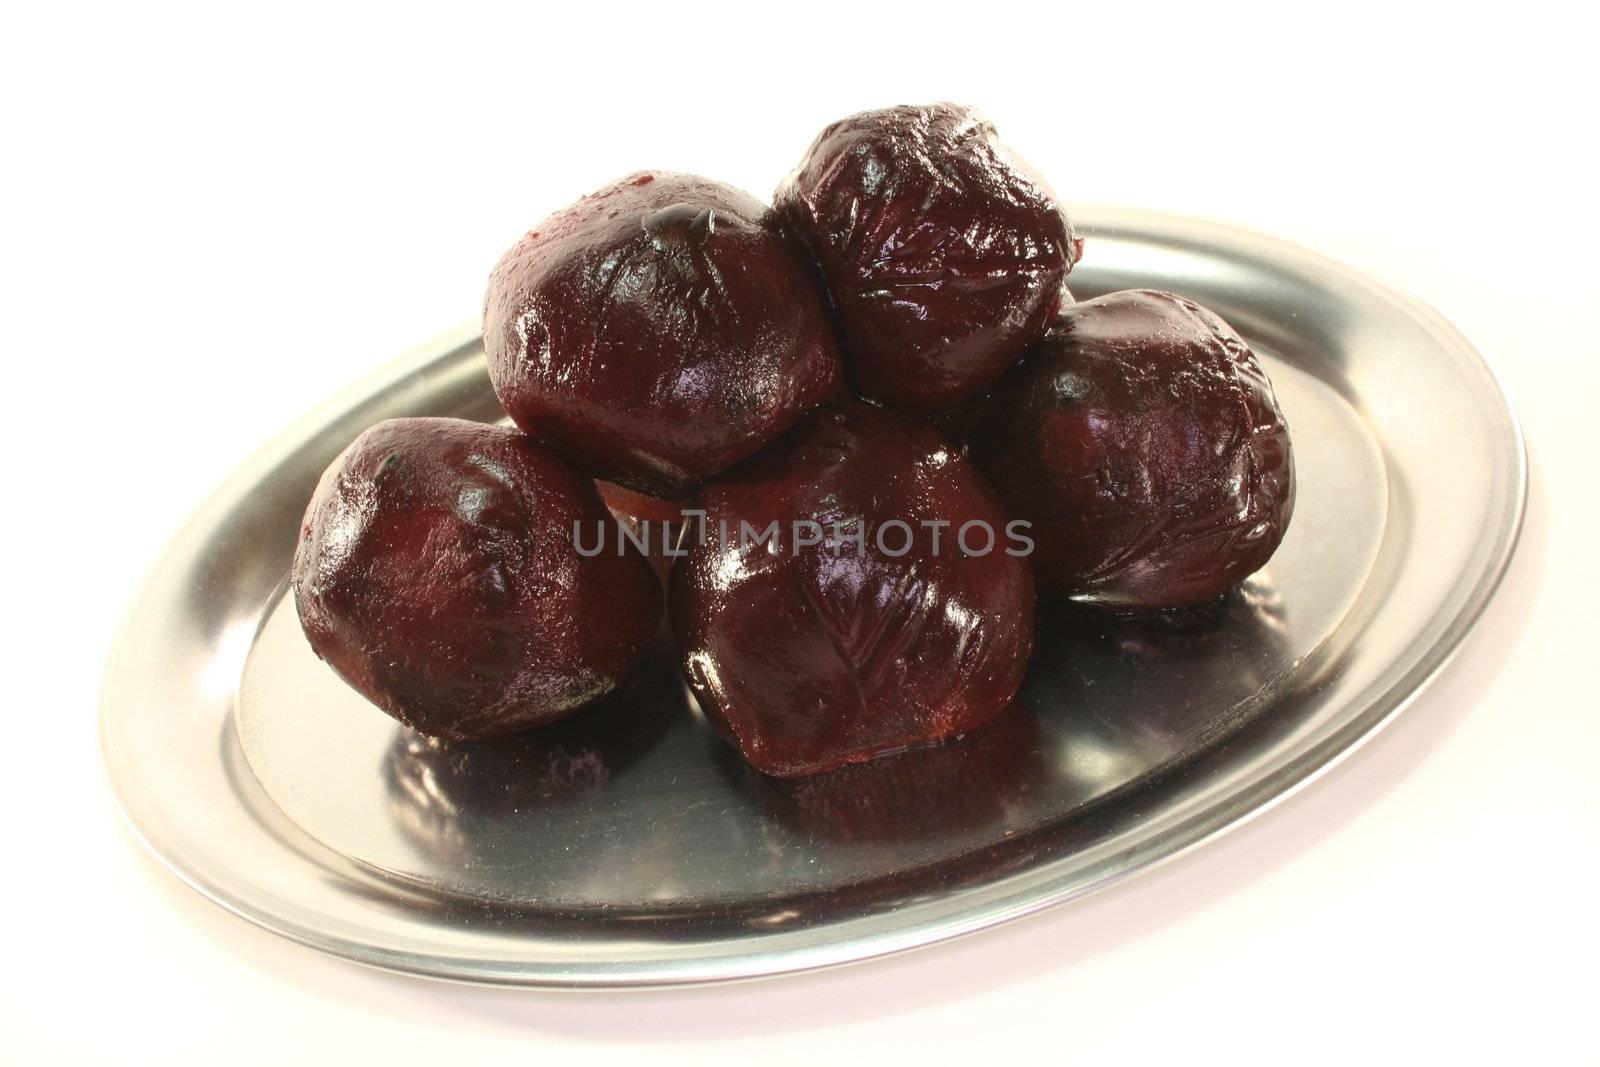 beetroot balls on a silver platter before white background